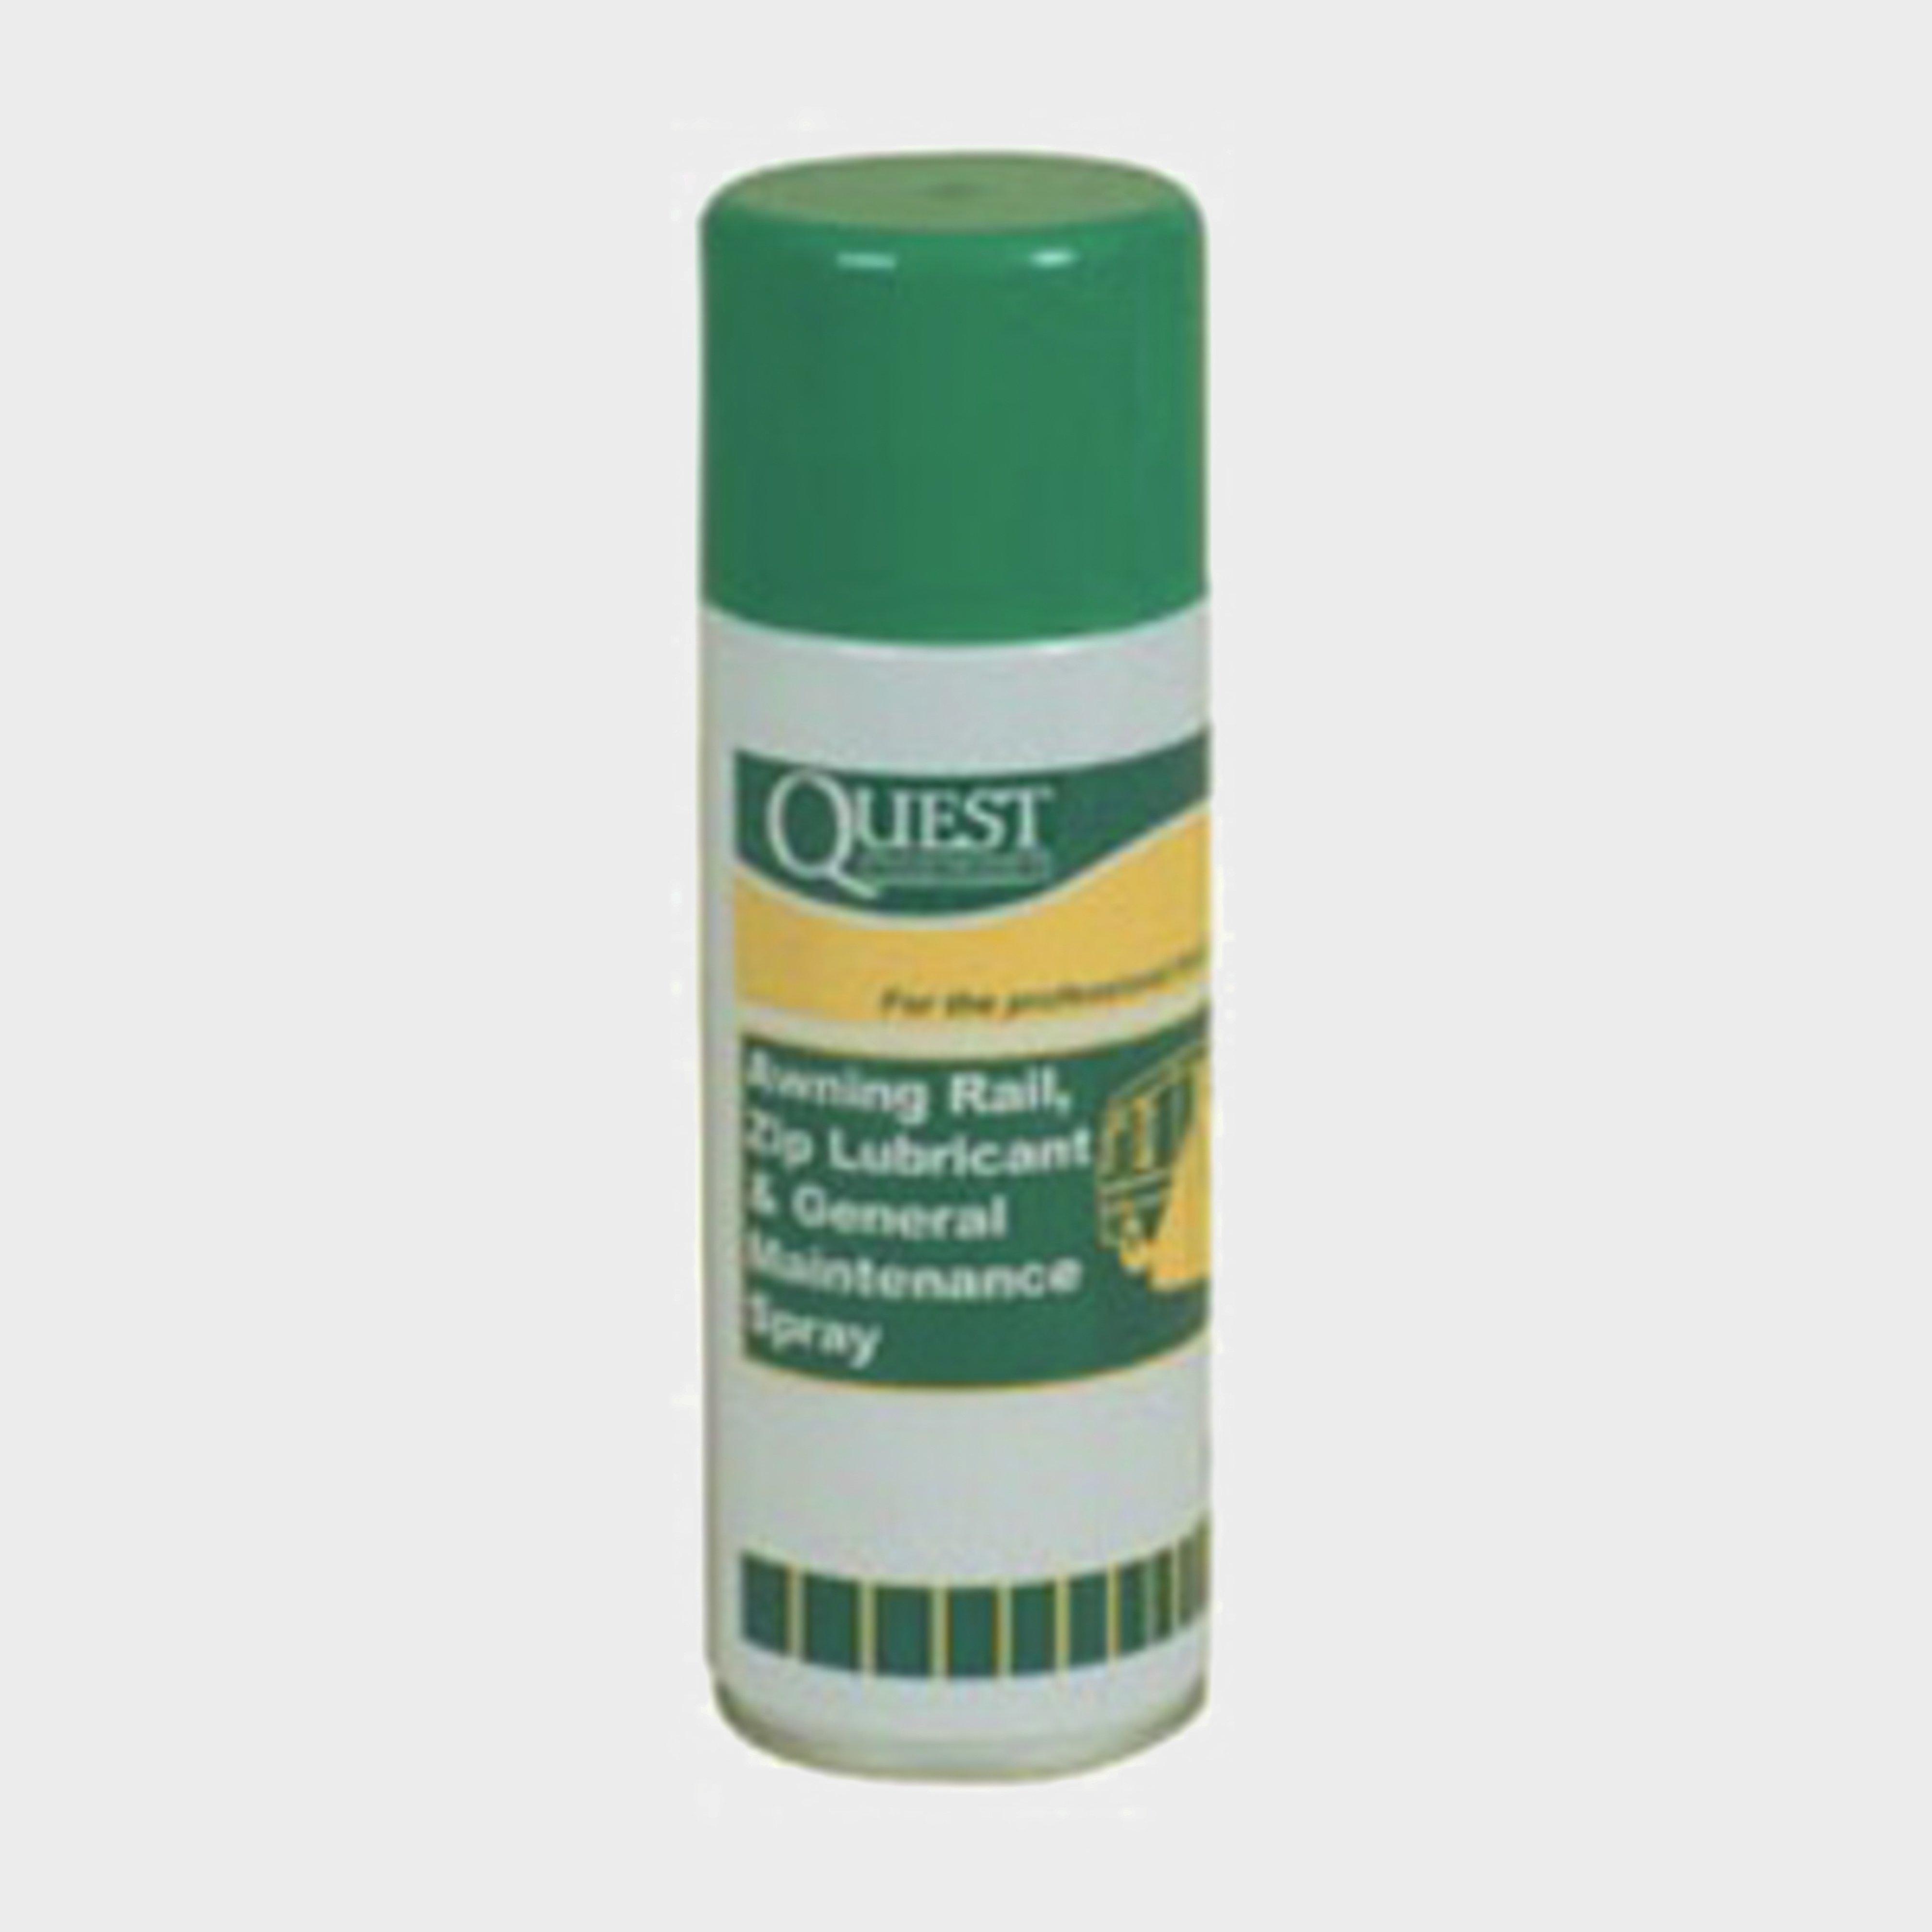 Quest Awning Rail Zip Lubricant  Green